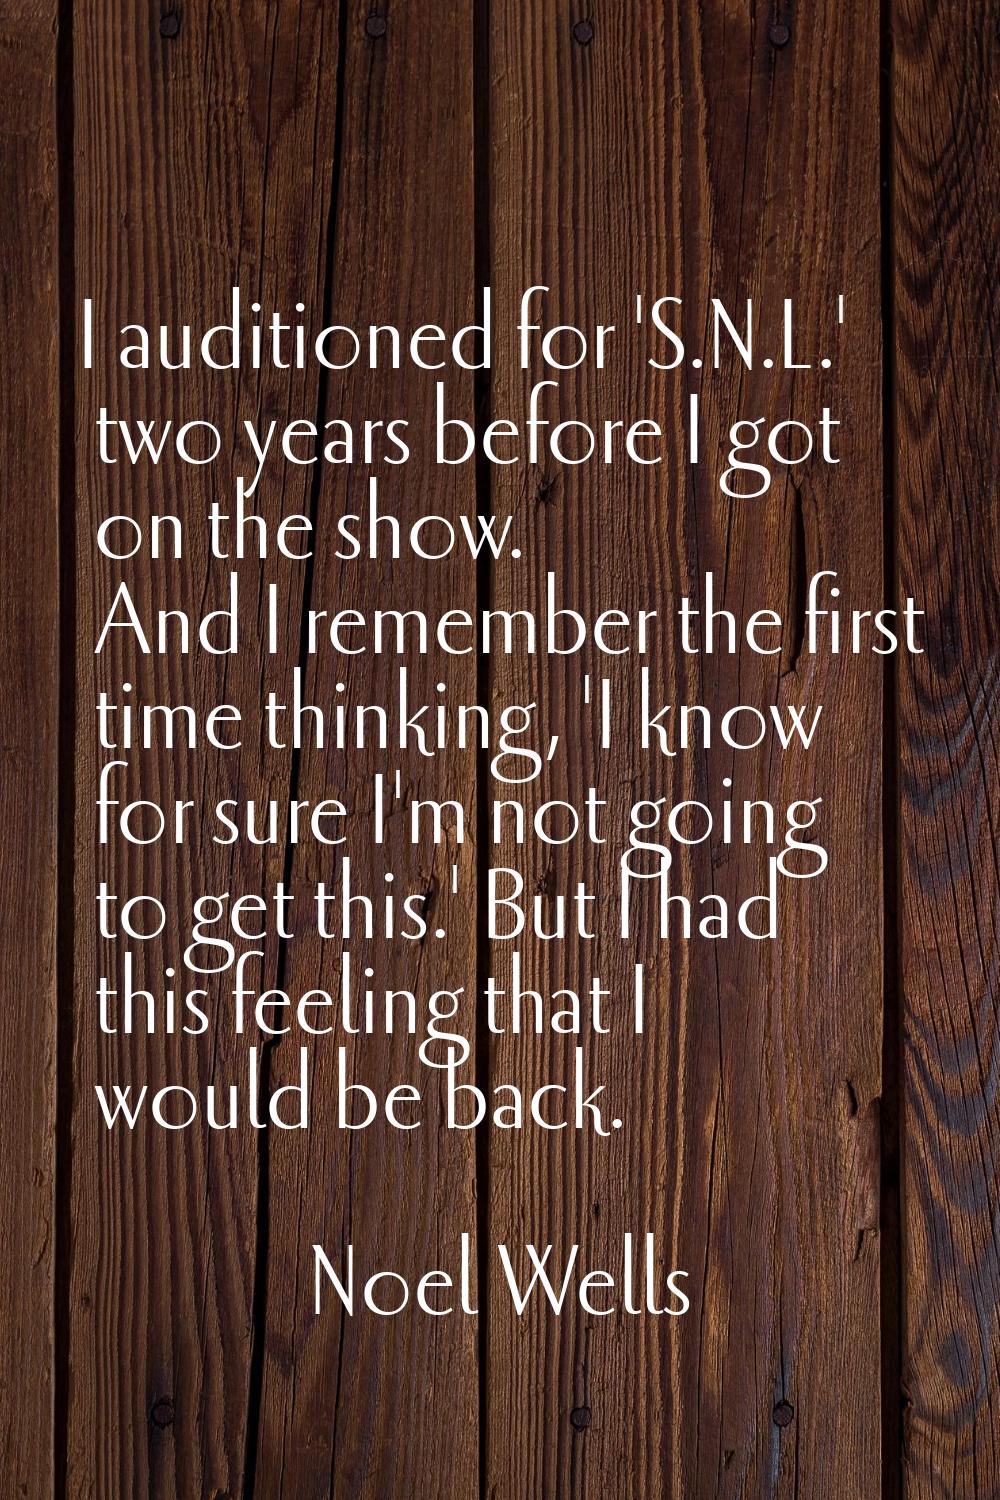 I auditioned for 'S.N.L.' two years before I got on the show. And I remember the first time thinkin